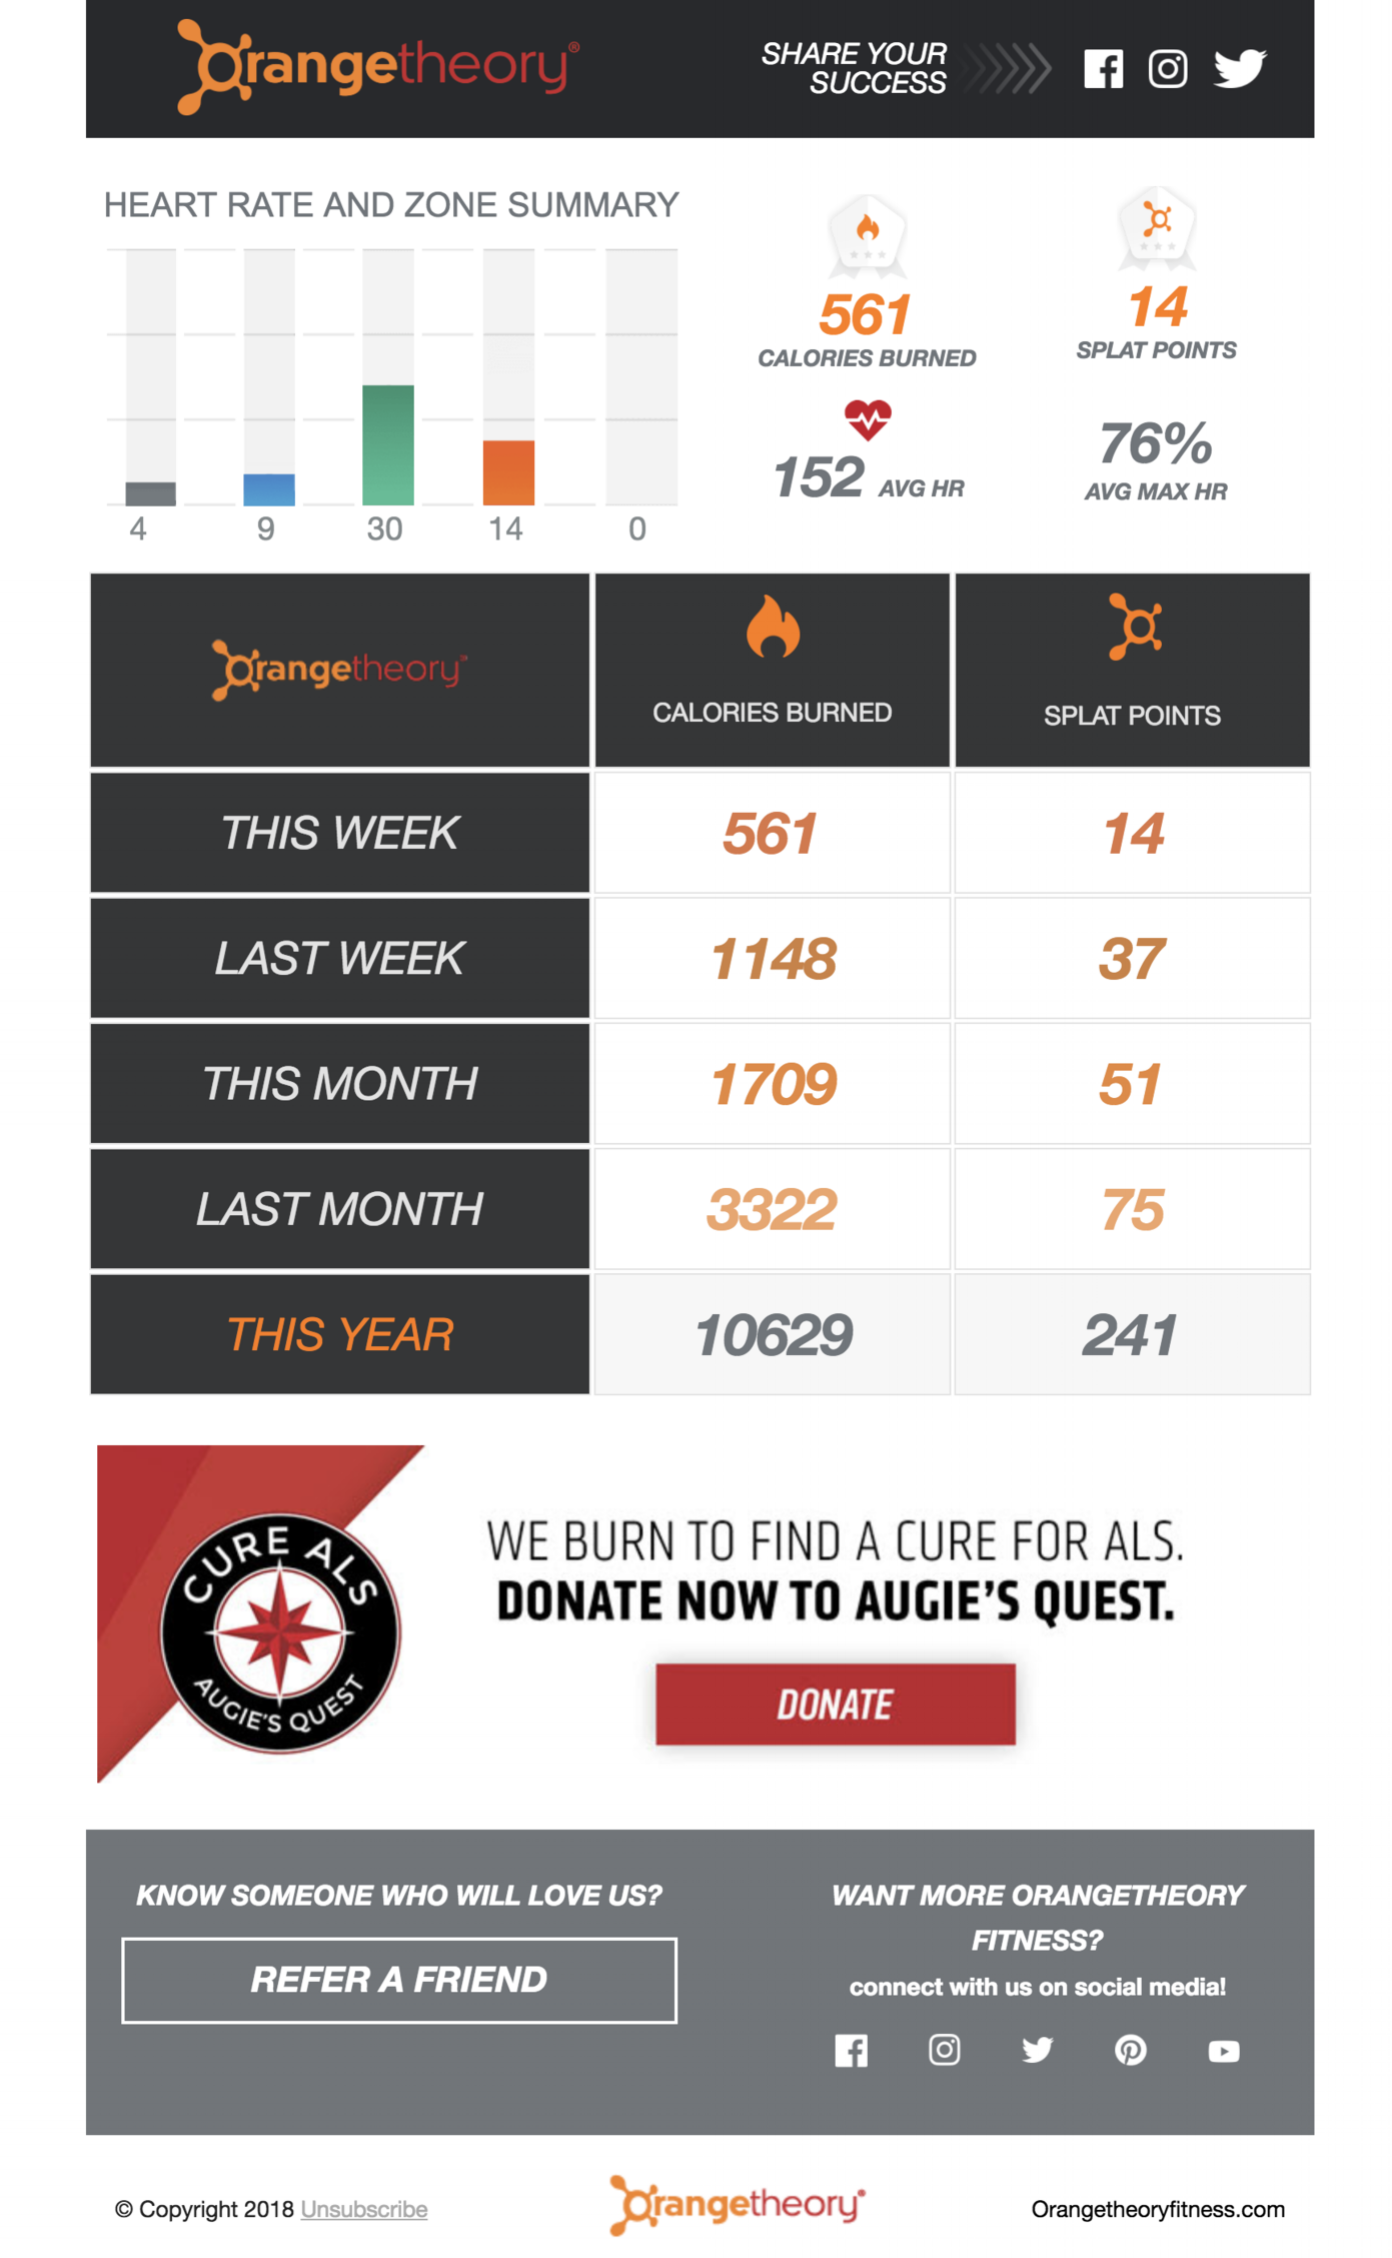 Orangetheory Fitness Workouts: What To Expect & FAQs